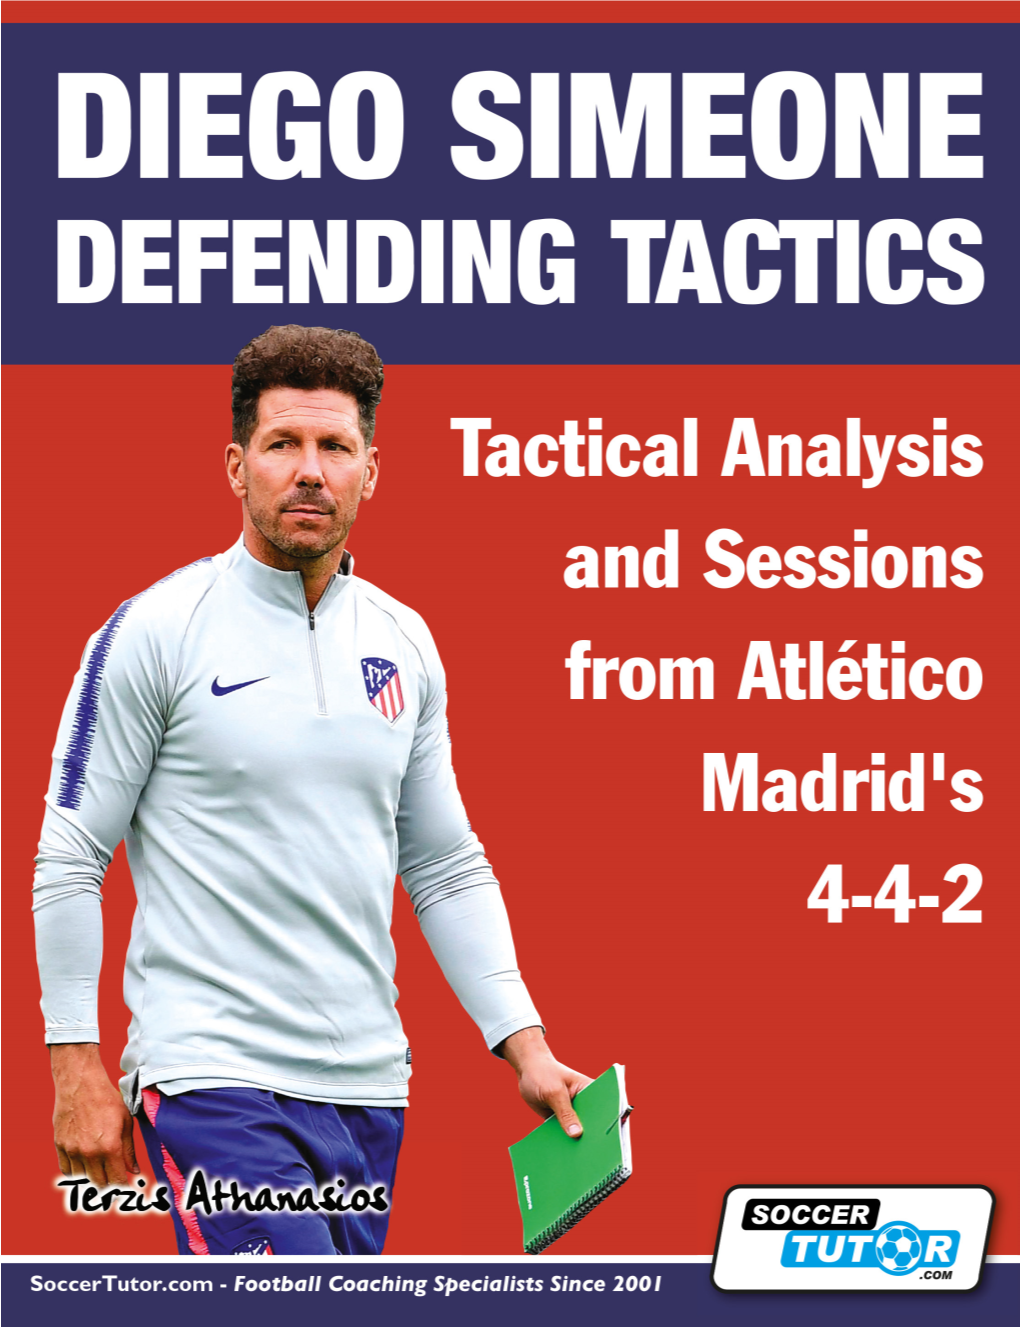 DIEGO SIMEONE DEFENDING TACTICS Tactical Analysis and Sessions from Atlético Madrid’S 4-4-2